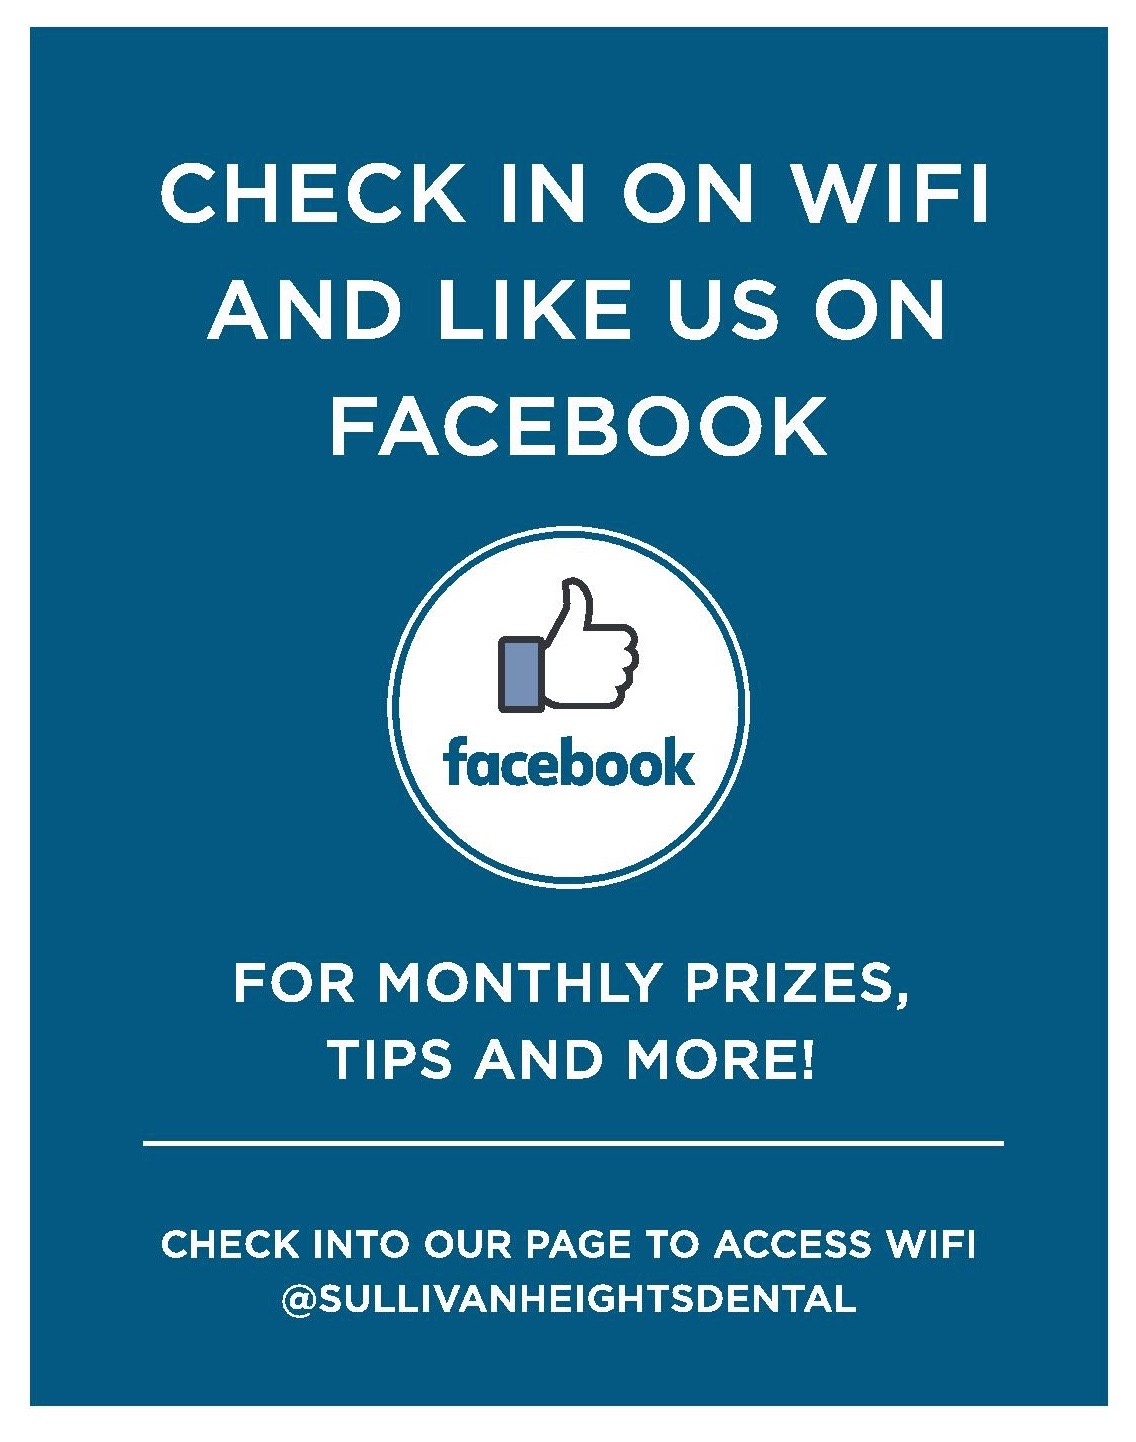 cant access facebook on wifi